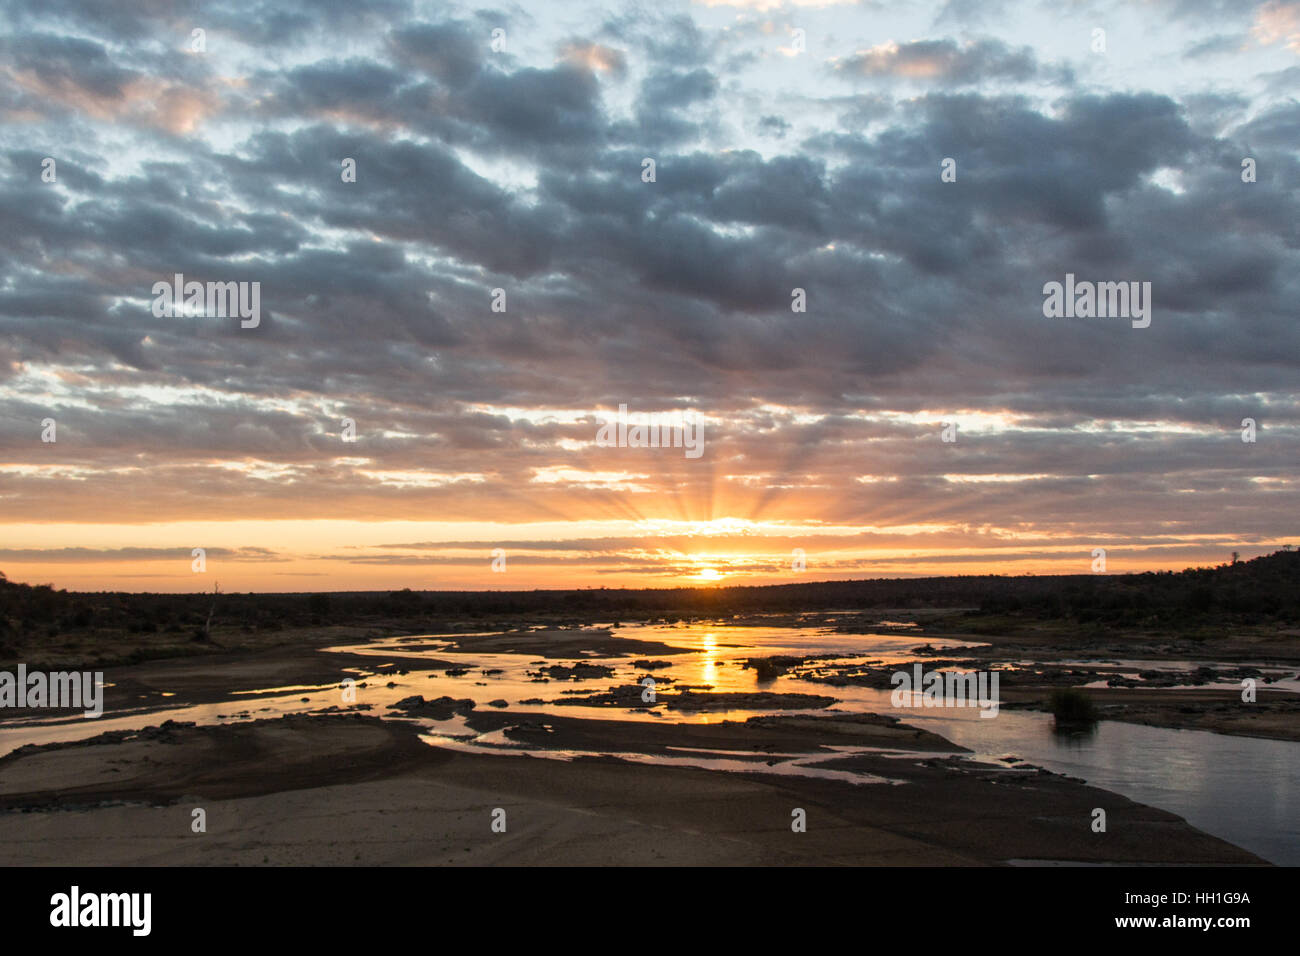 This sunset picture was taken in the Kruger National Park, overlooking the Olifants river. Stock Photo